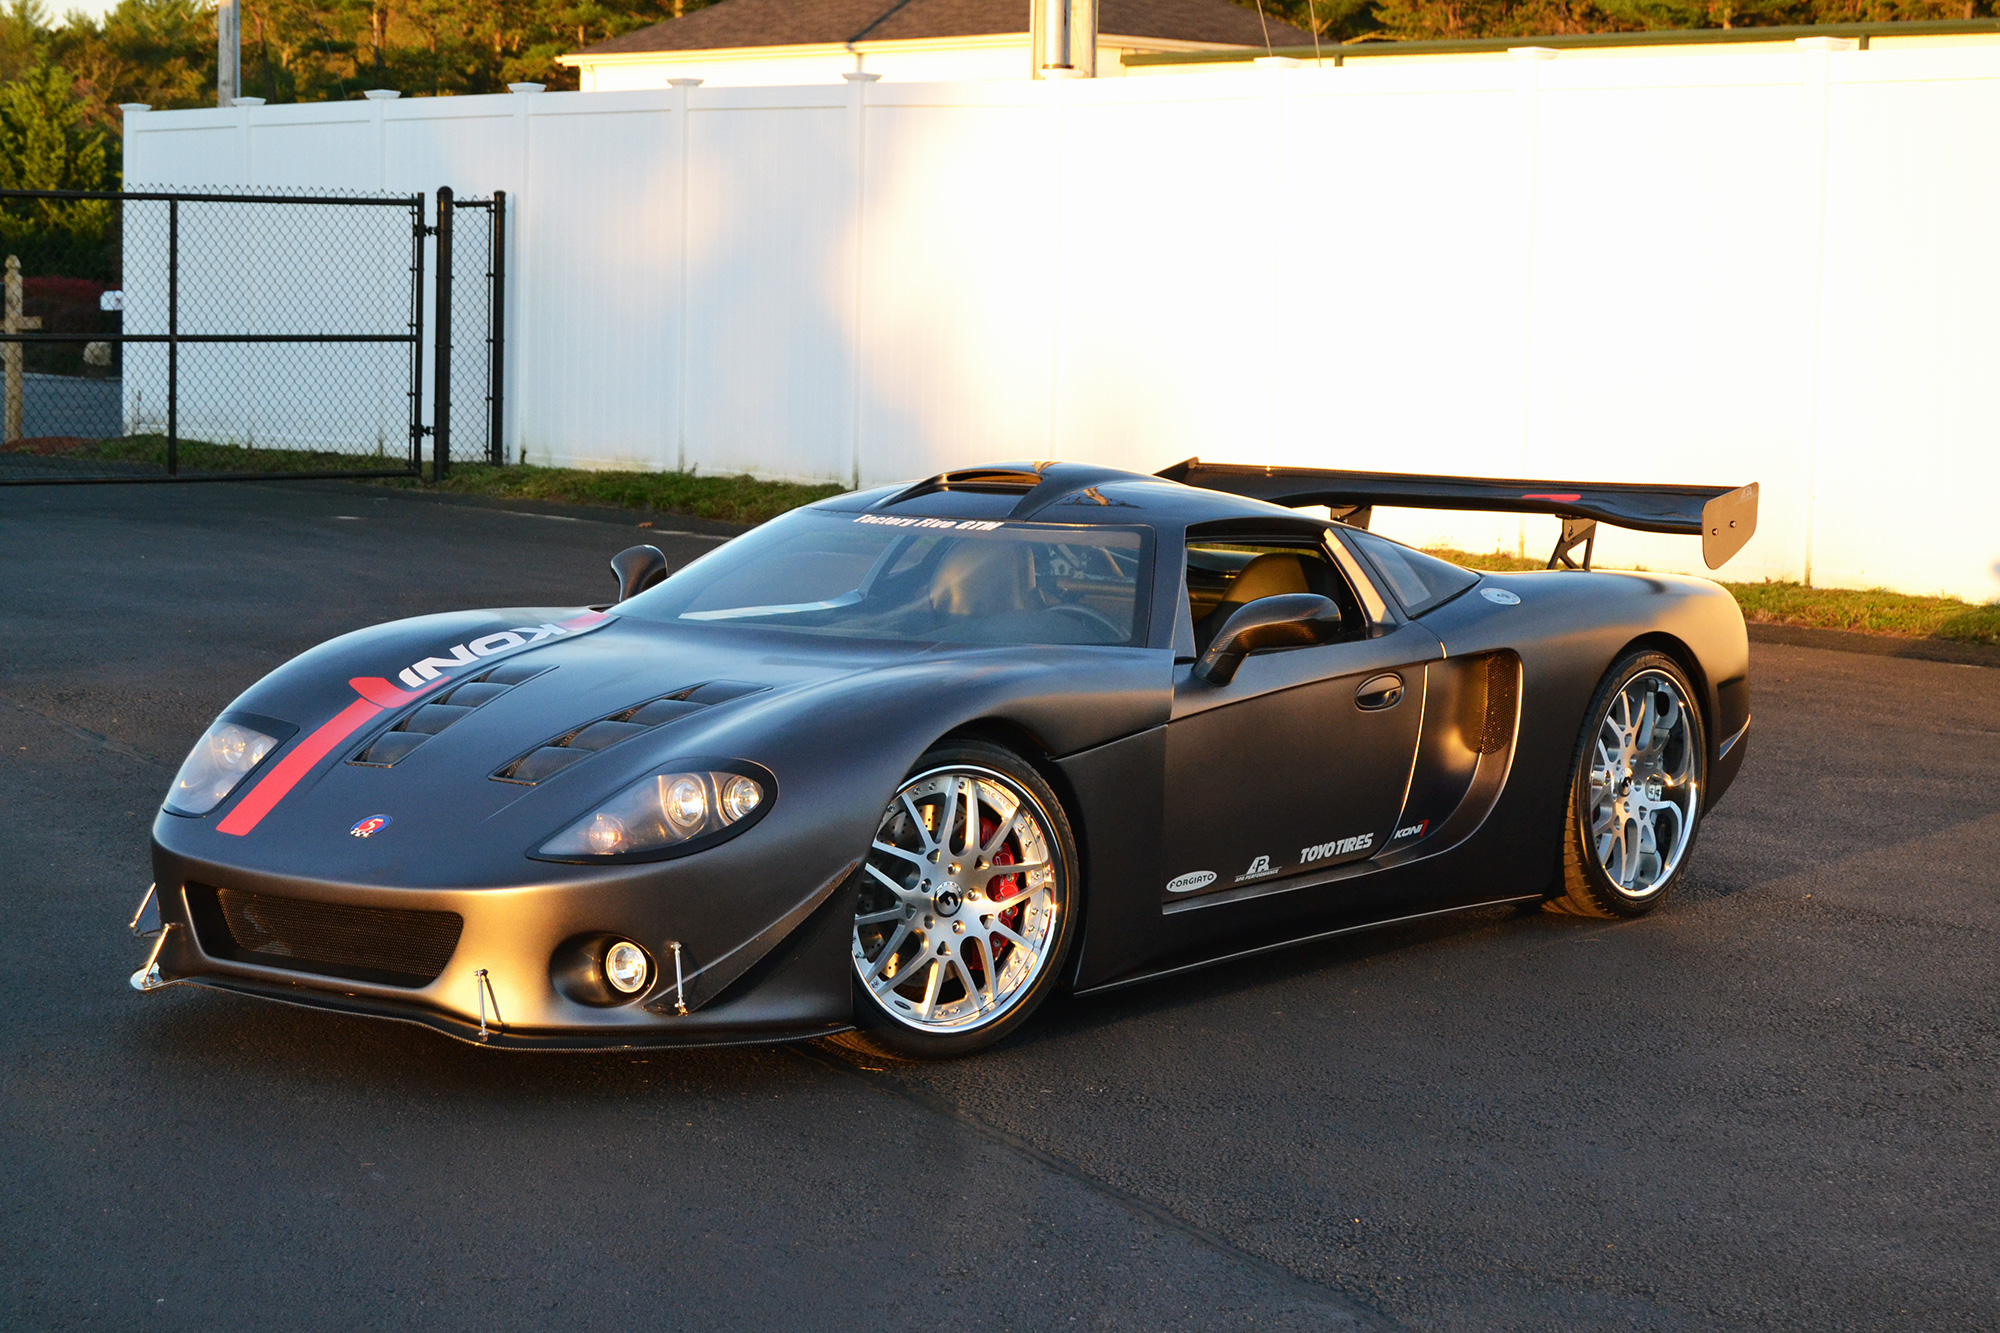 GTM машина. Factory Five Racing GTM. Factory Five GTM. Factory Five GTM цена. Gtm 2